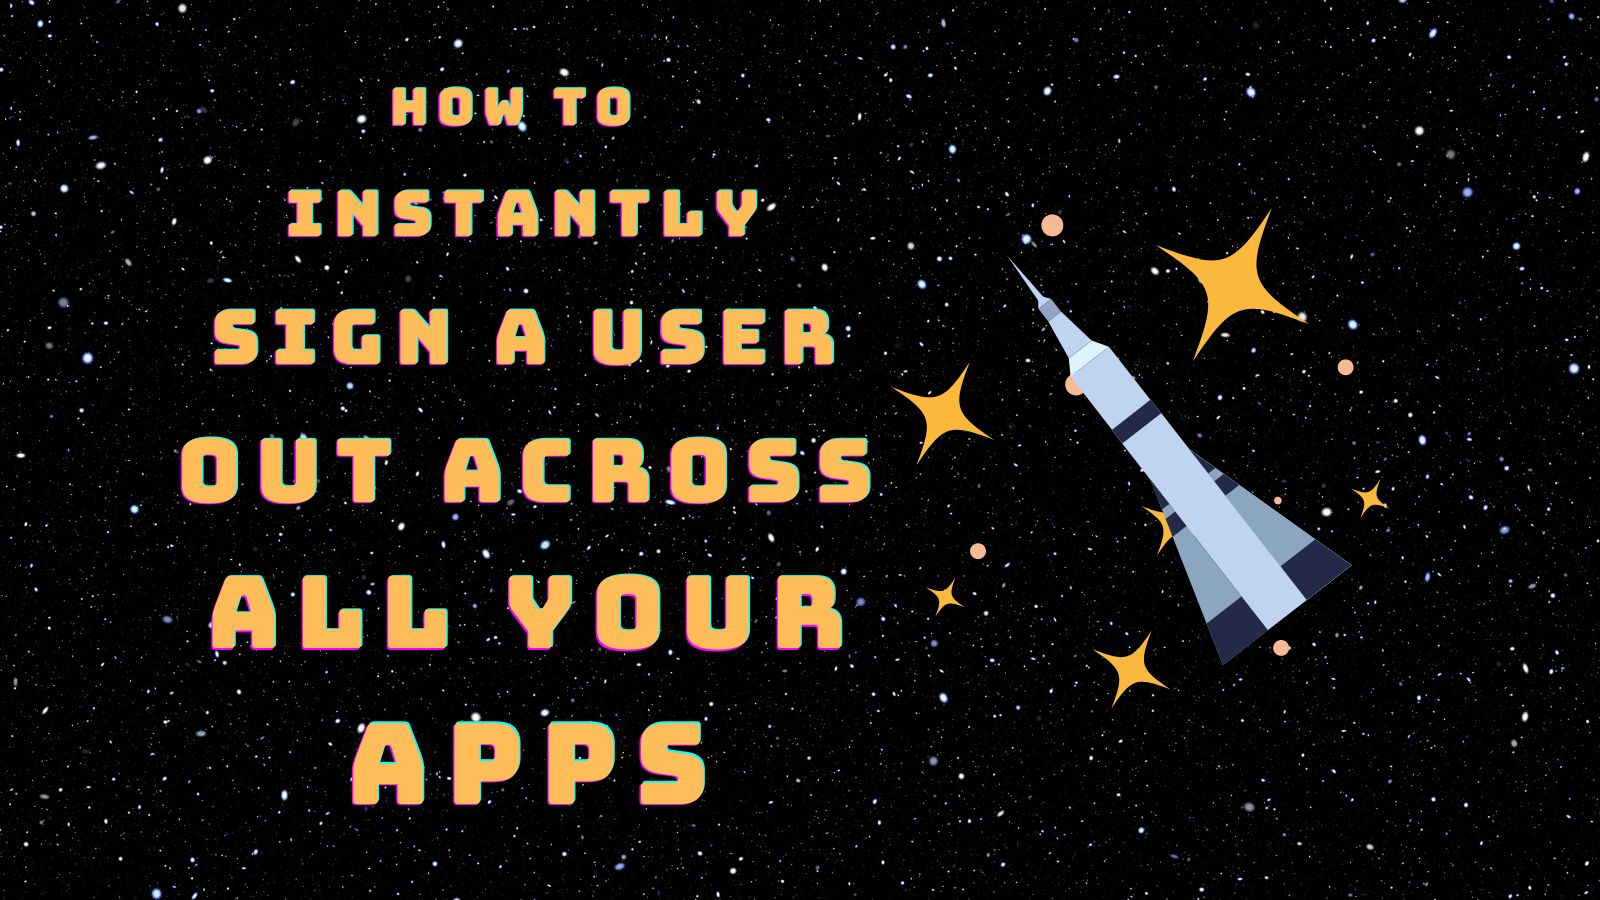 How to Instantly Sign a User Out across All Your Apps